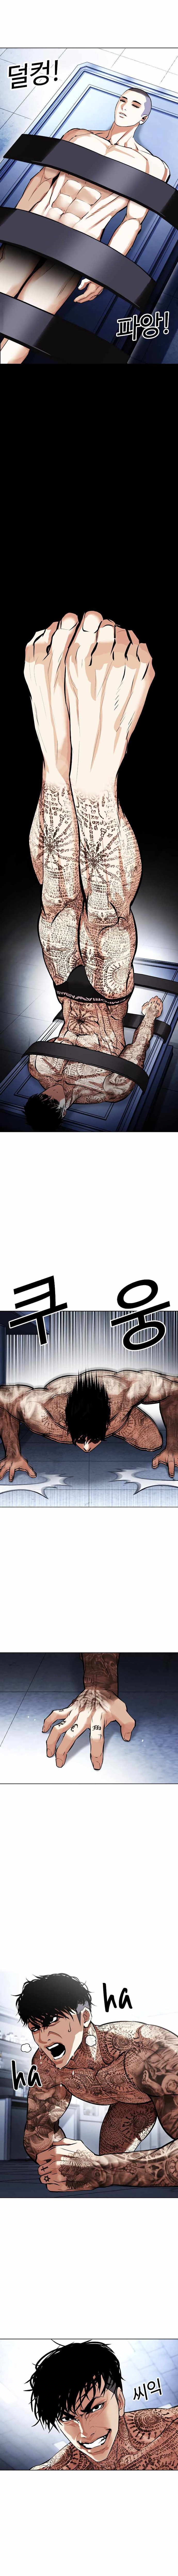 Lookism, Chapter 444